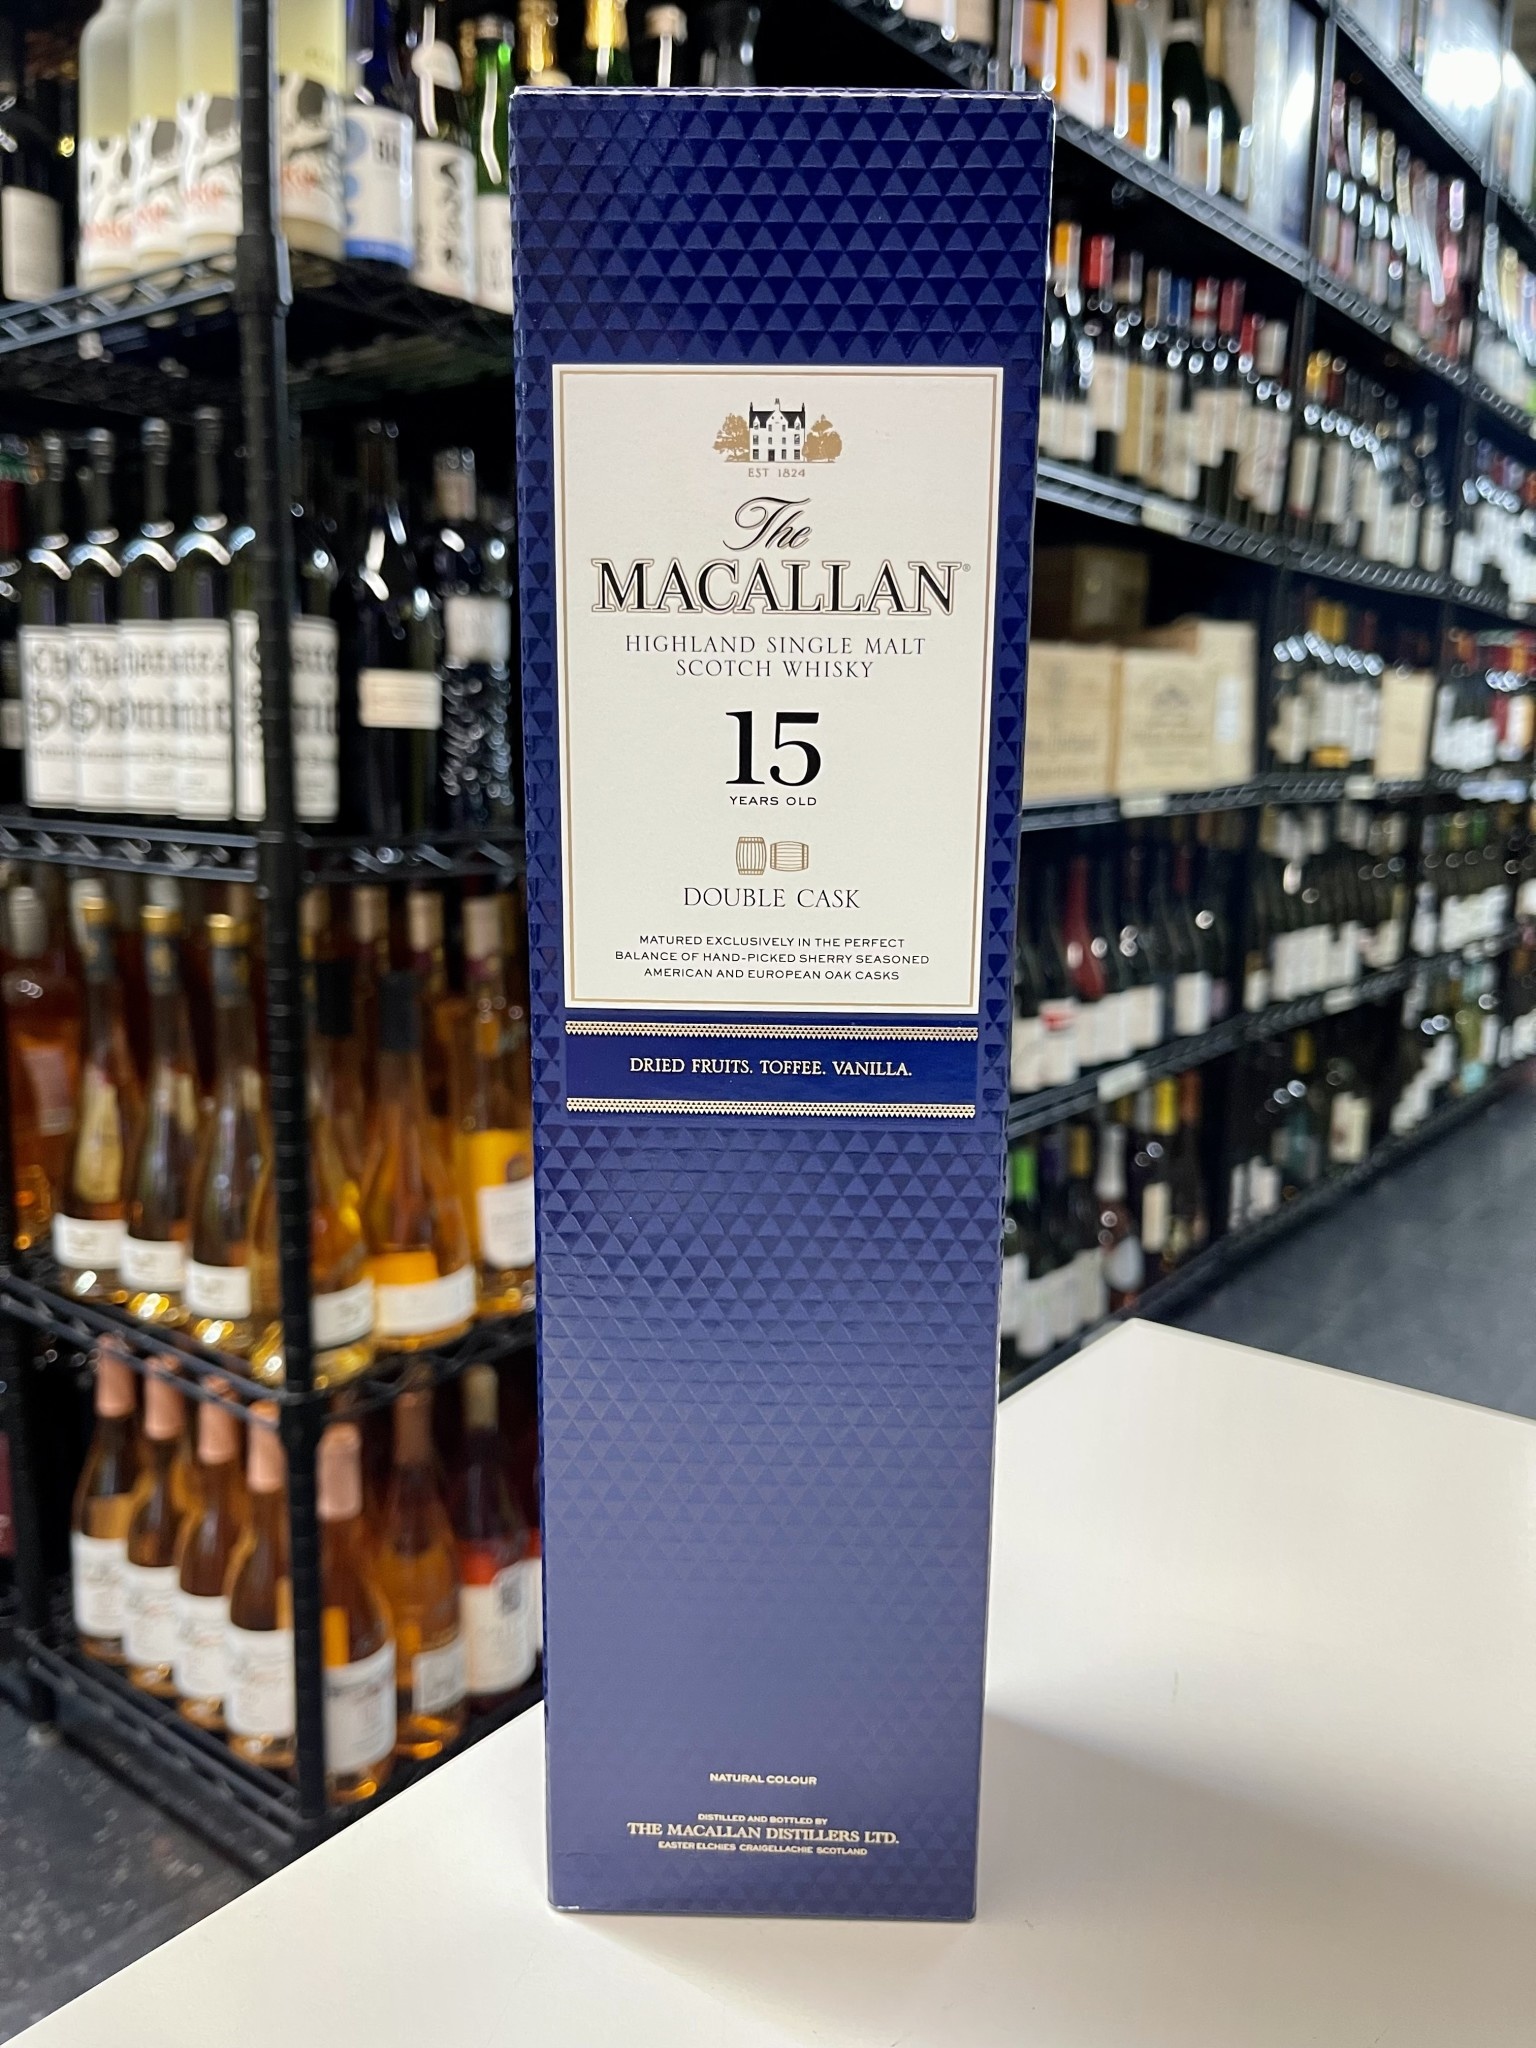 The Macallan 15 Year Double Cask Scotch Whisky 750ml - Divino